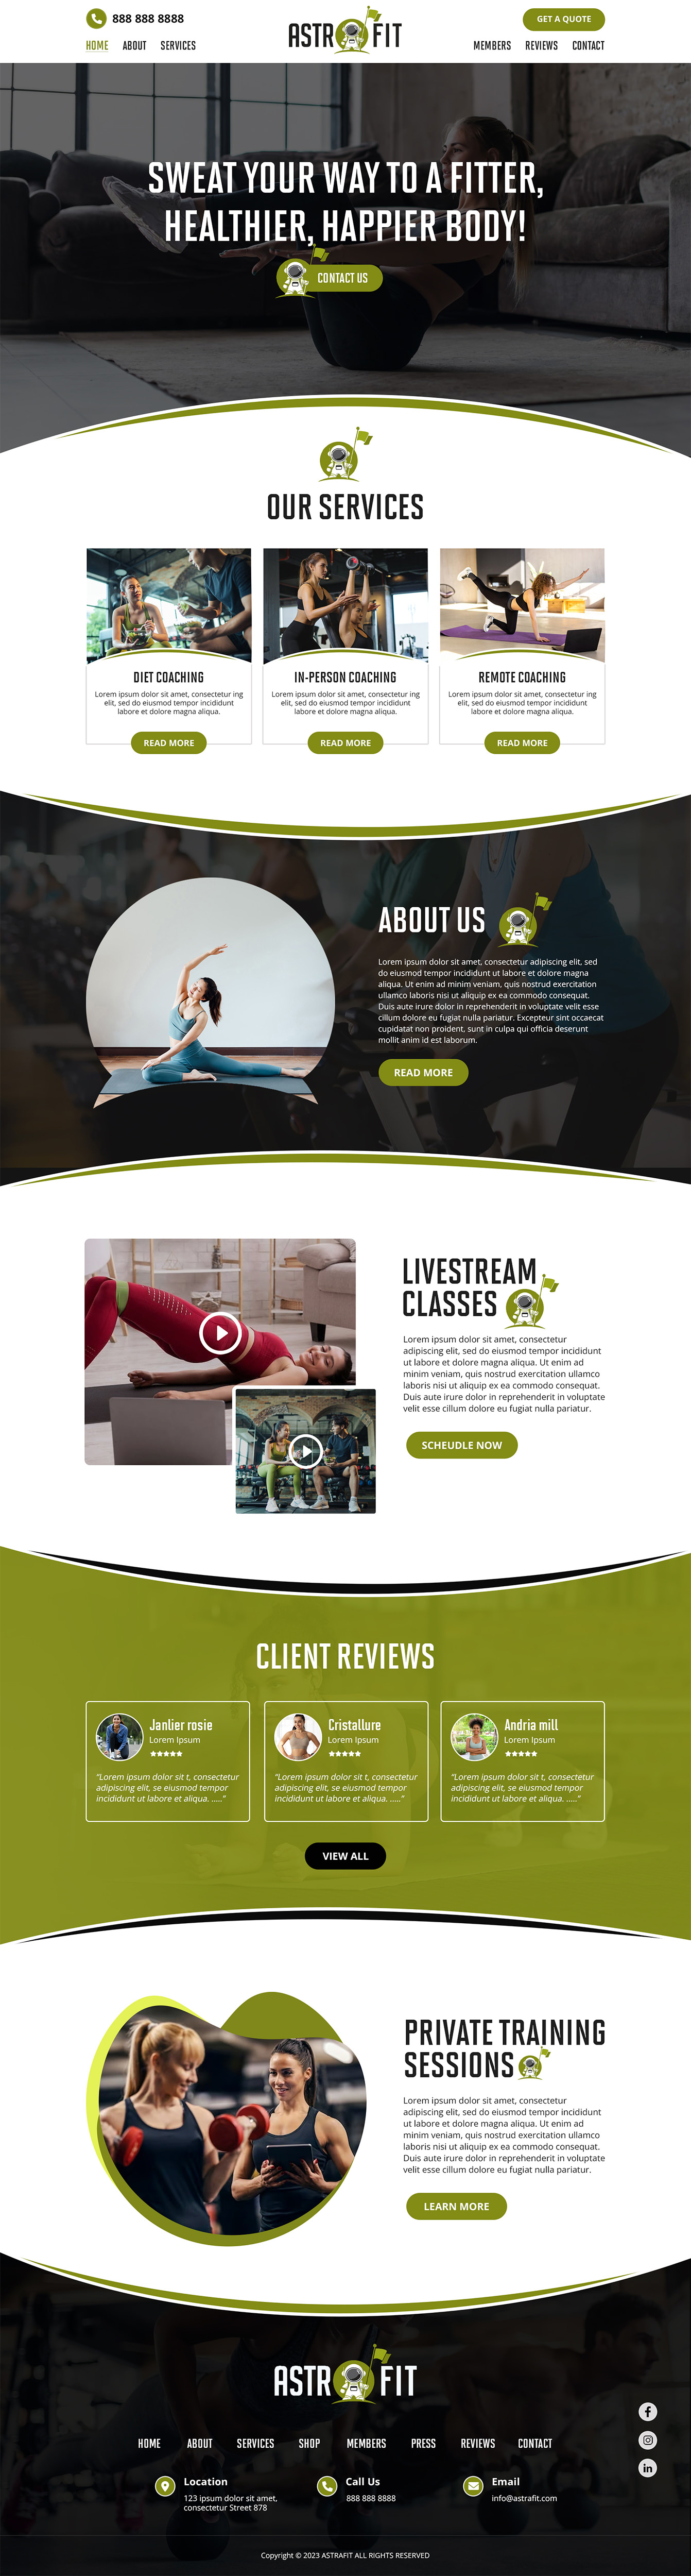 Personal Trainer website example